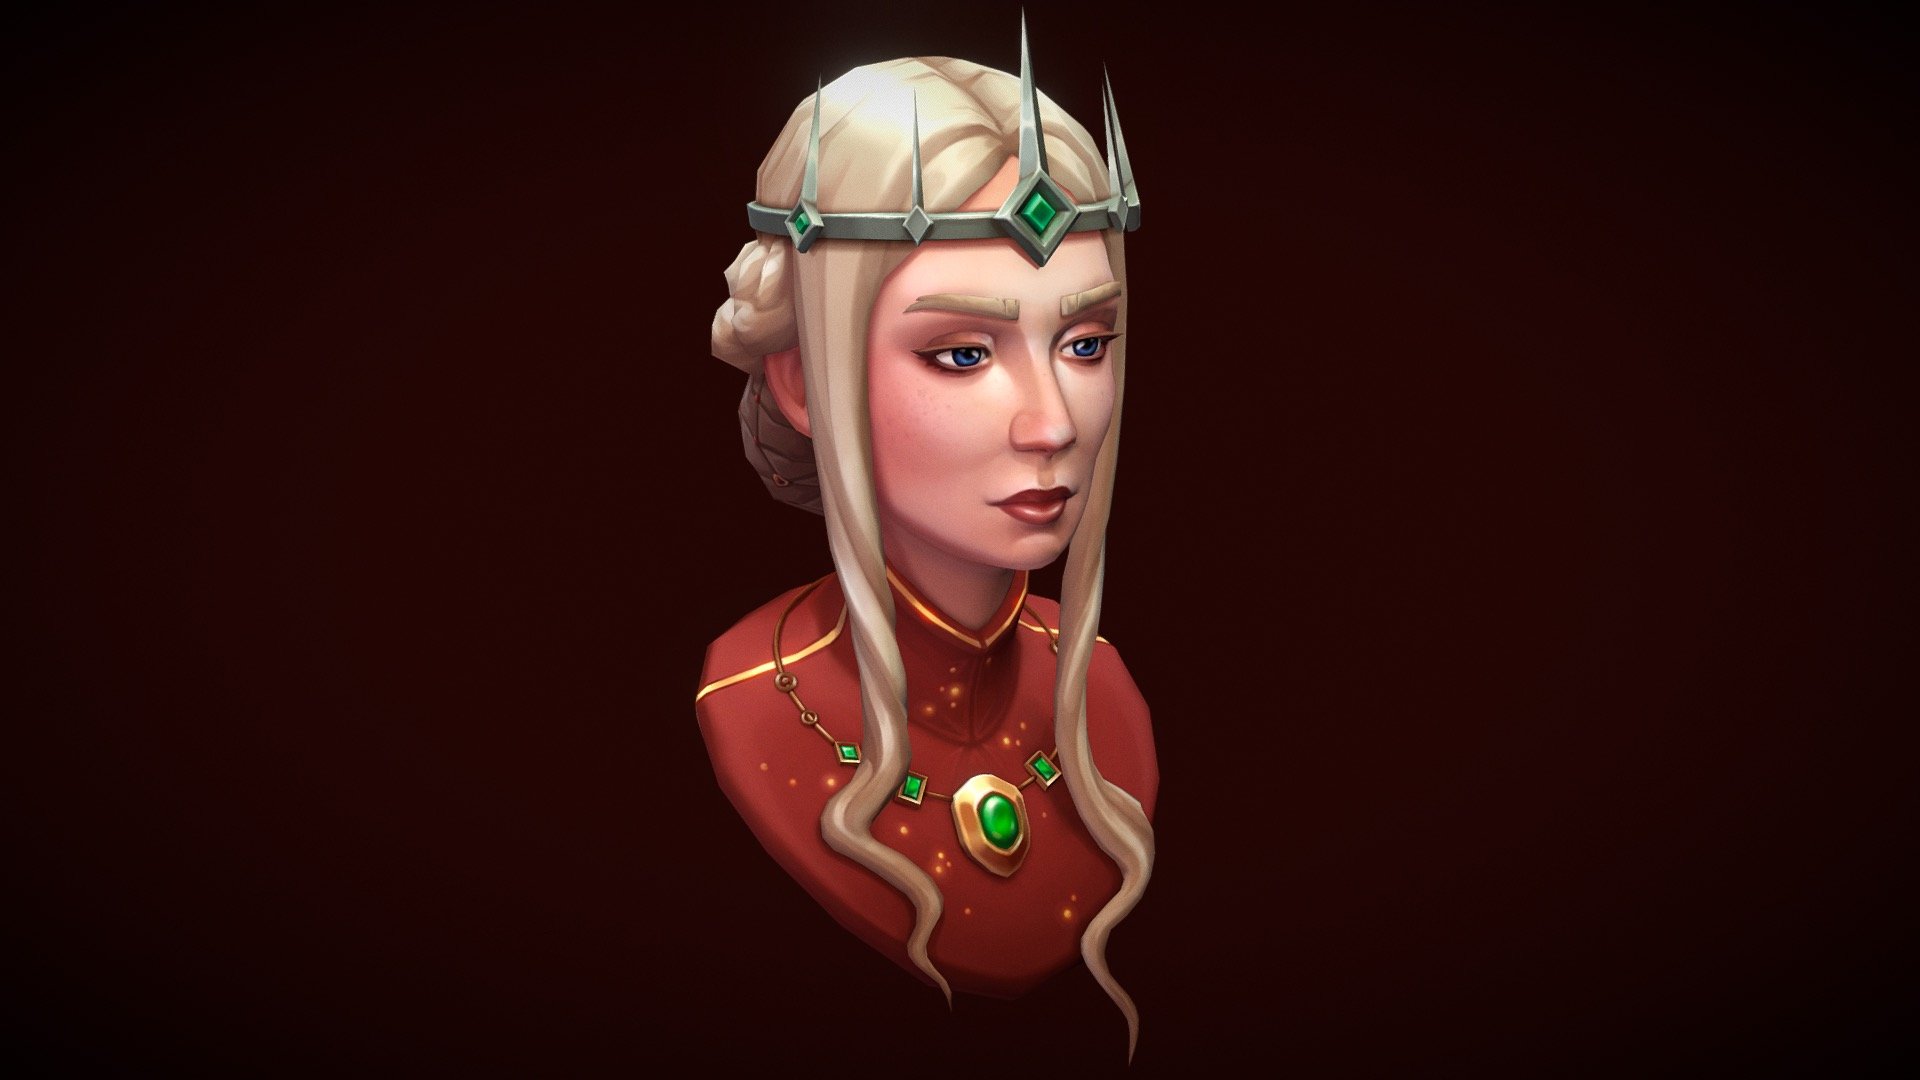 This princess portrait was created by me as part of a personal practice. I started by making a highpoly sculpt in Zbrush, then retopologized in Blender. For texturing, I decided to do a hand-painted texture in Blender 3d model